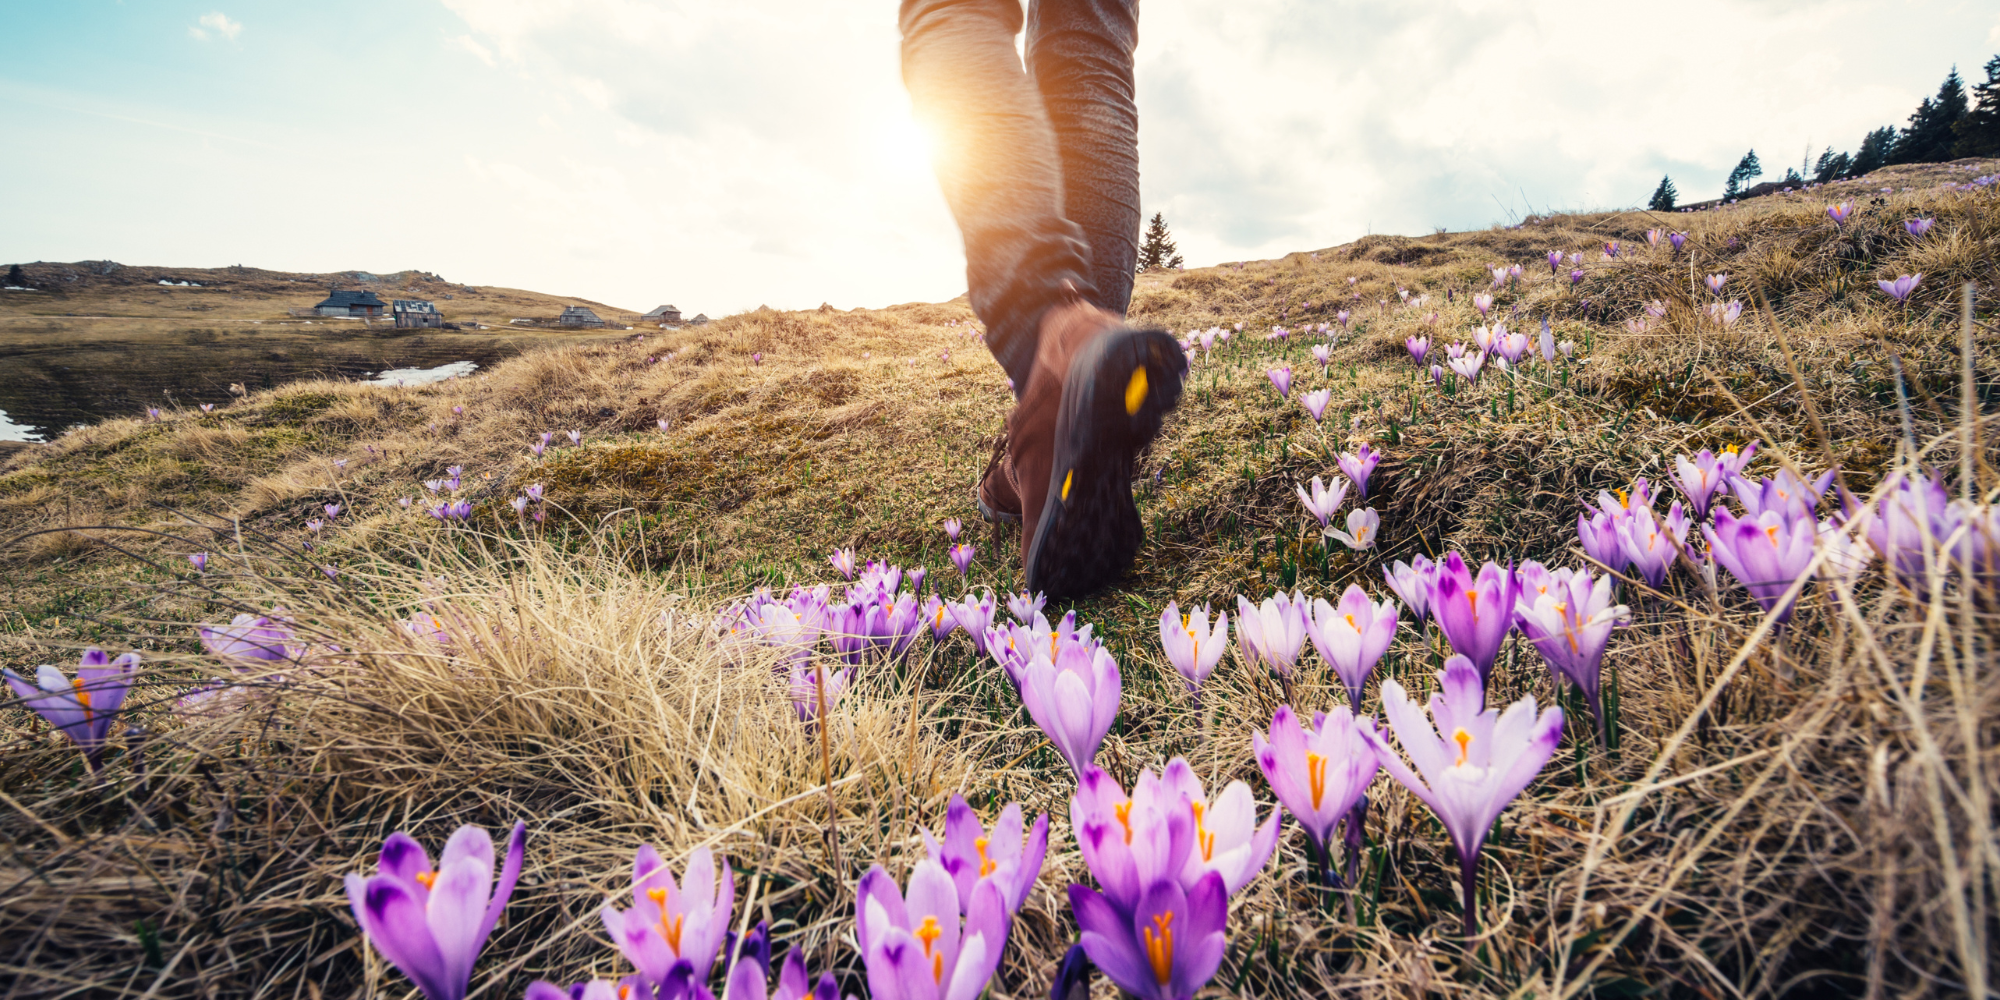 Person walking in a dry field - only their lower legs and hiking boots are visible. They've just passed a little clump of purple wild flowers.